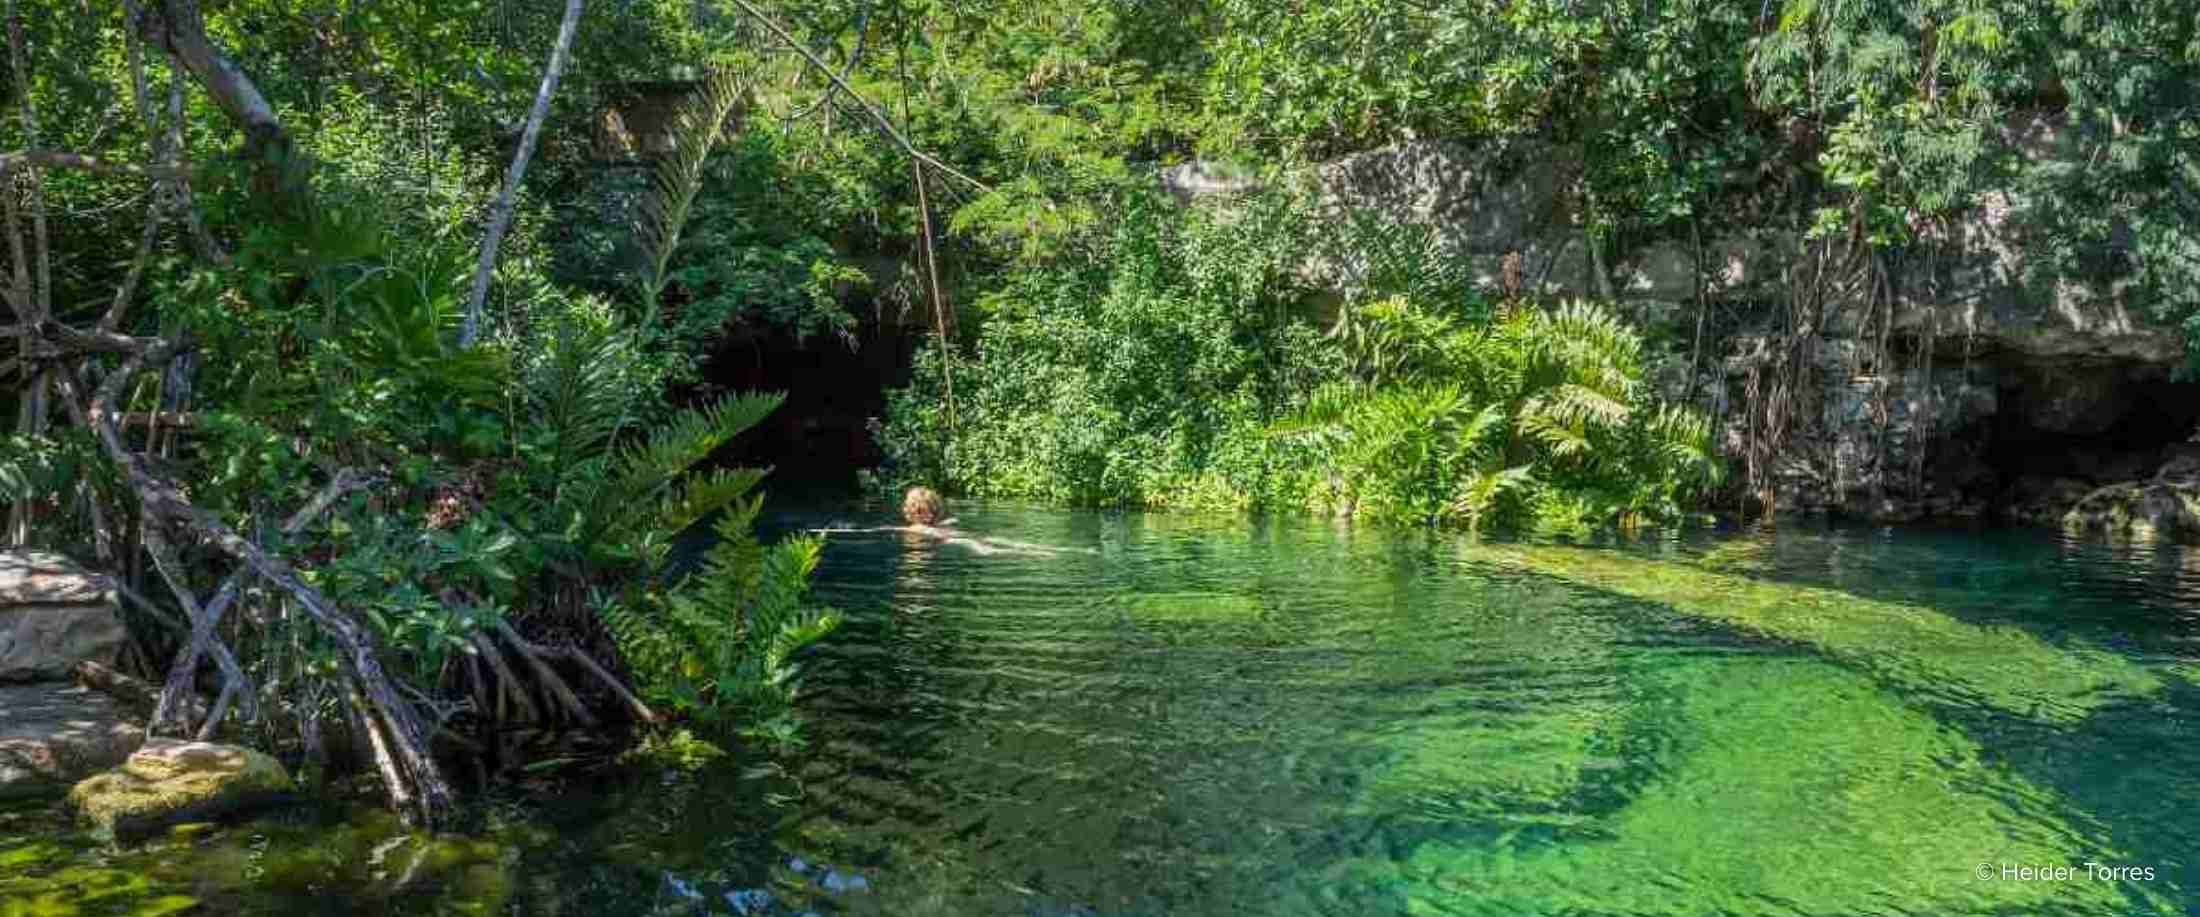 A tourist swims in a freshwater cenote, or pool fed by underground rivers, in Quintana Roo, Mexico